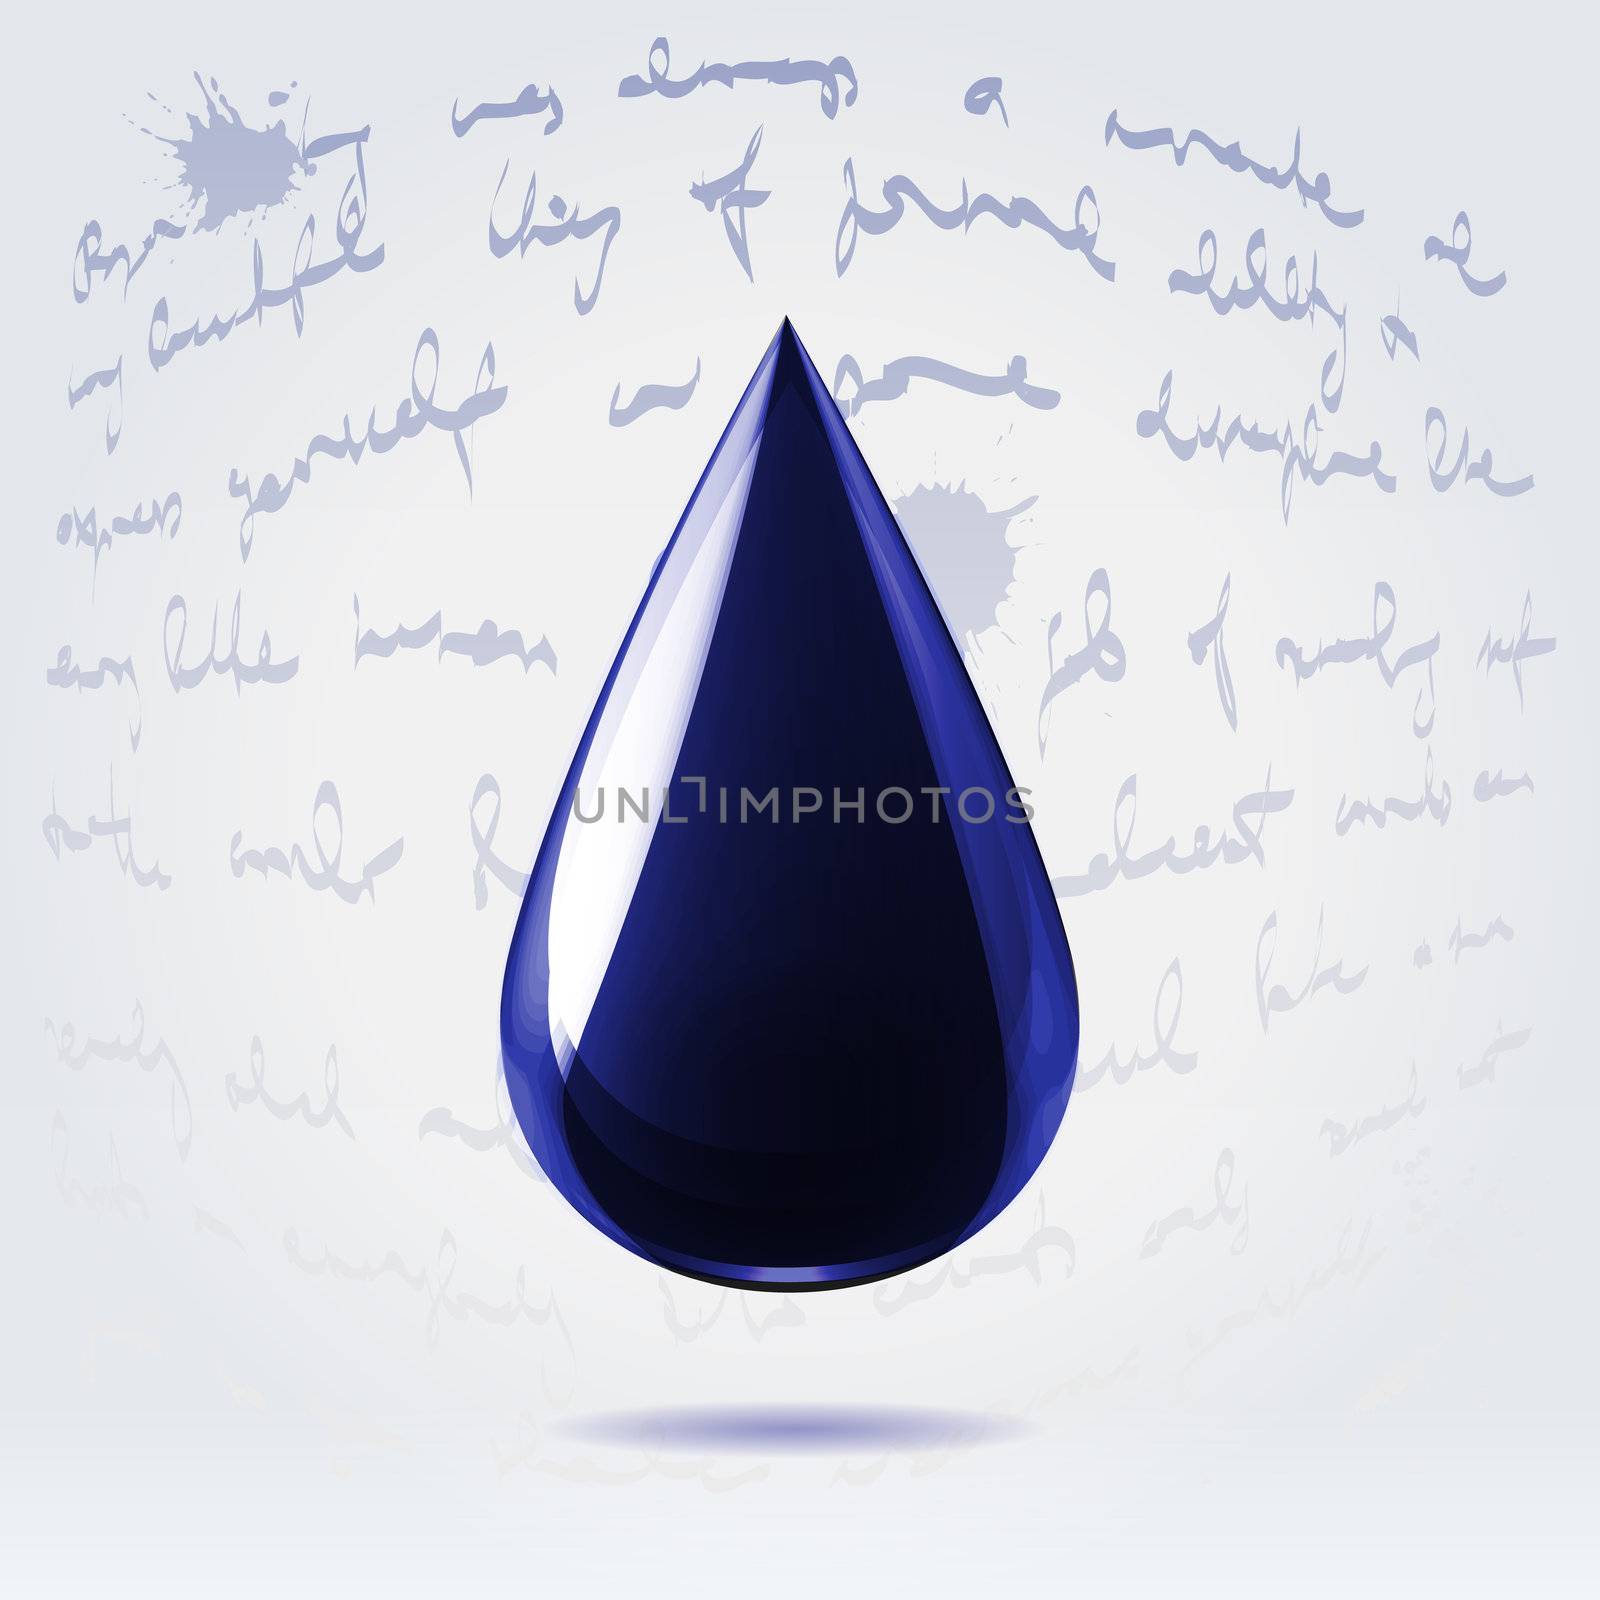 Ink glossy drop on a light handwritten background by pics4sale